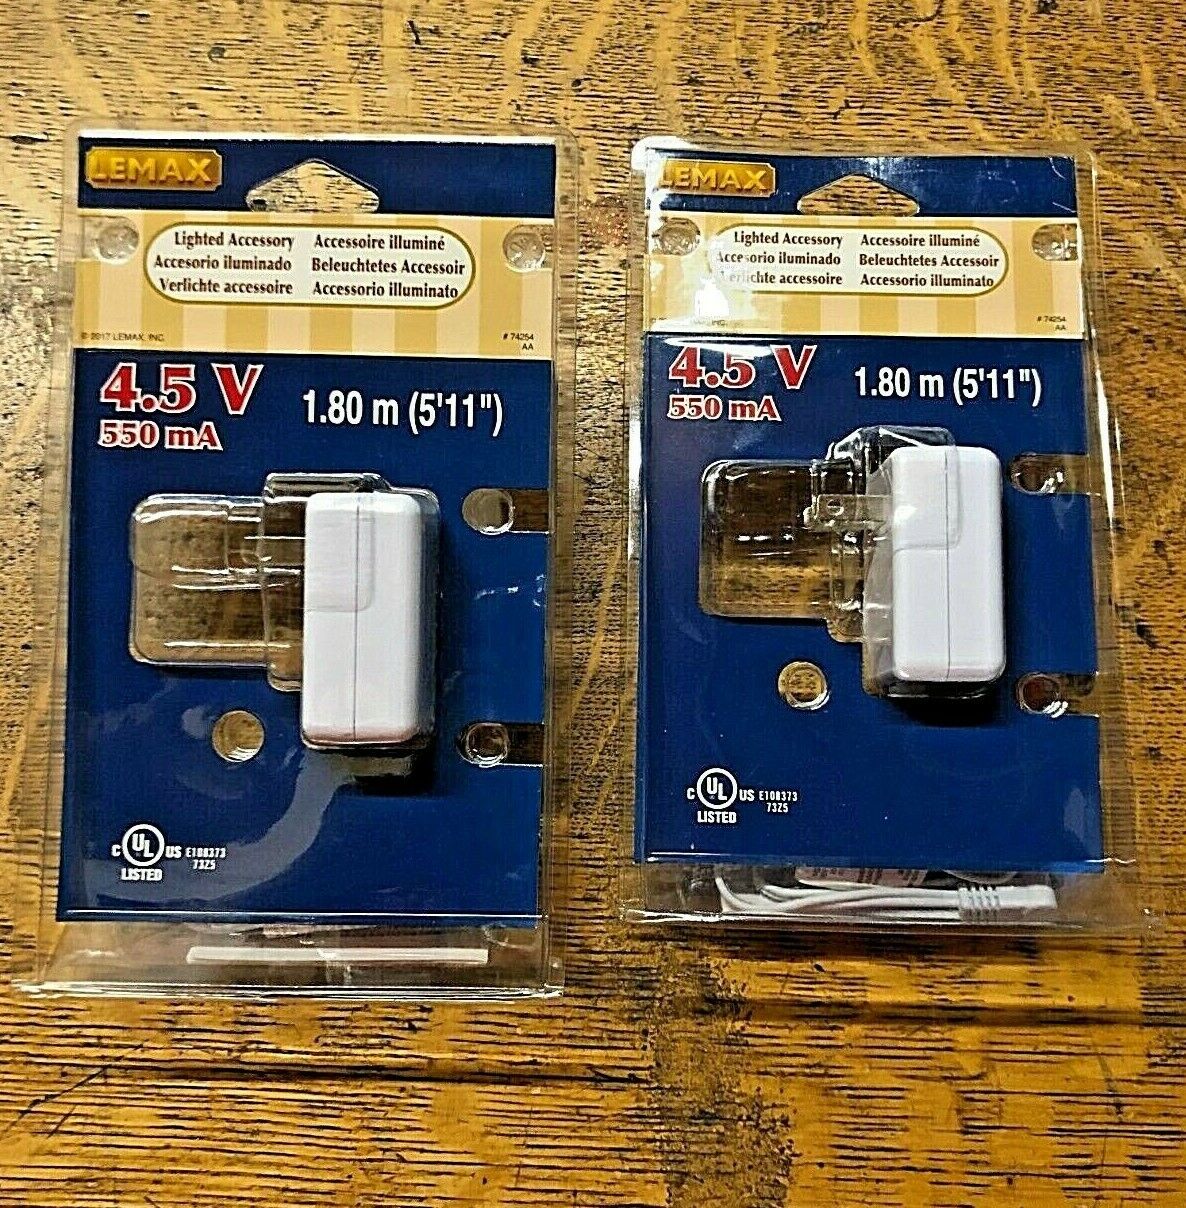  LEMAX - TWO (2) 4.5 V Lighted Accessory Power Adapters #74254 